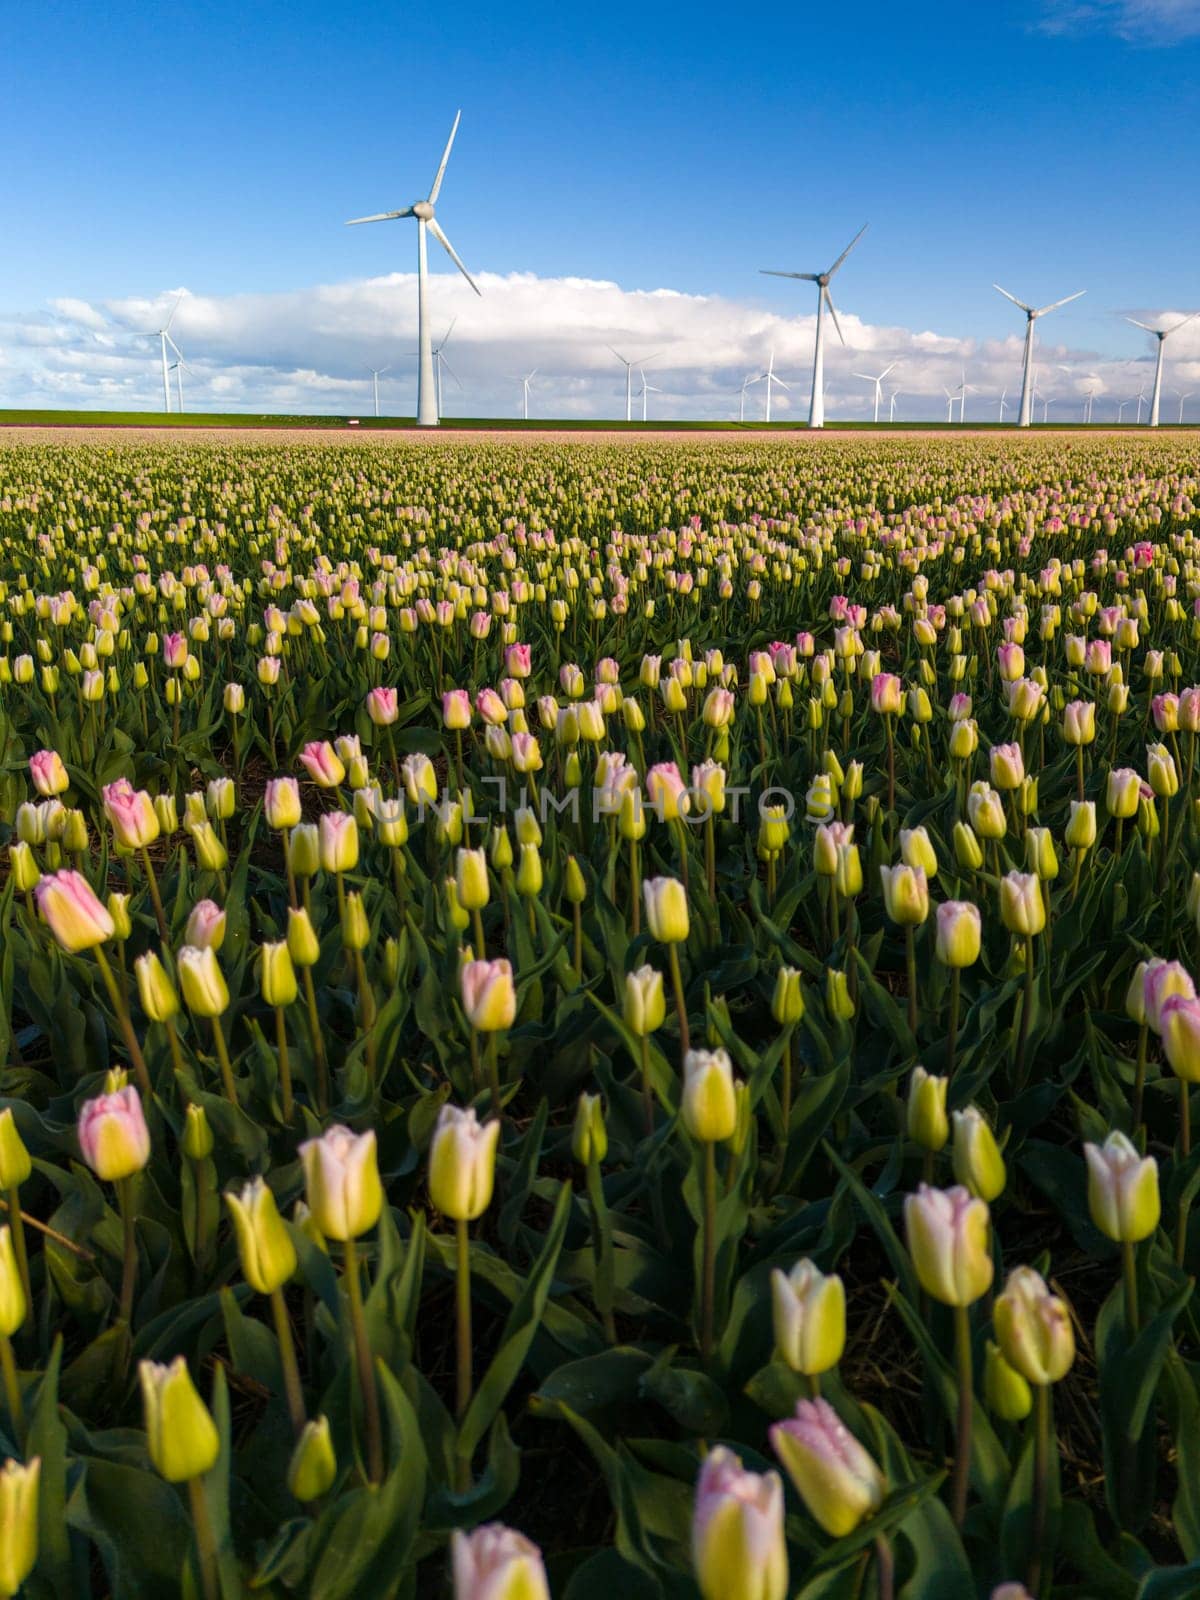 A vibrant field of tulips stretches out beneath the towering windmills of the Netherlands in Spring, creating a colorful and picturesque scene. windmill turbines in the Noordoostpolder Netherlands